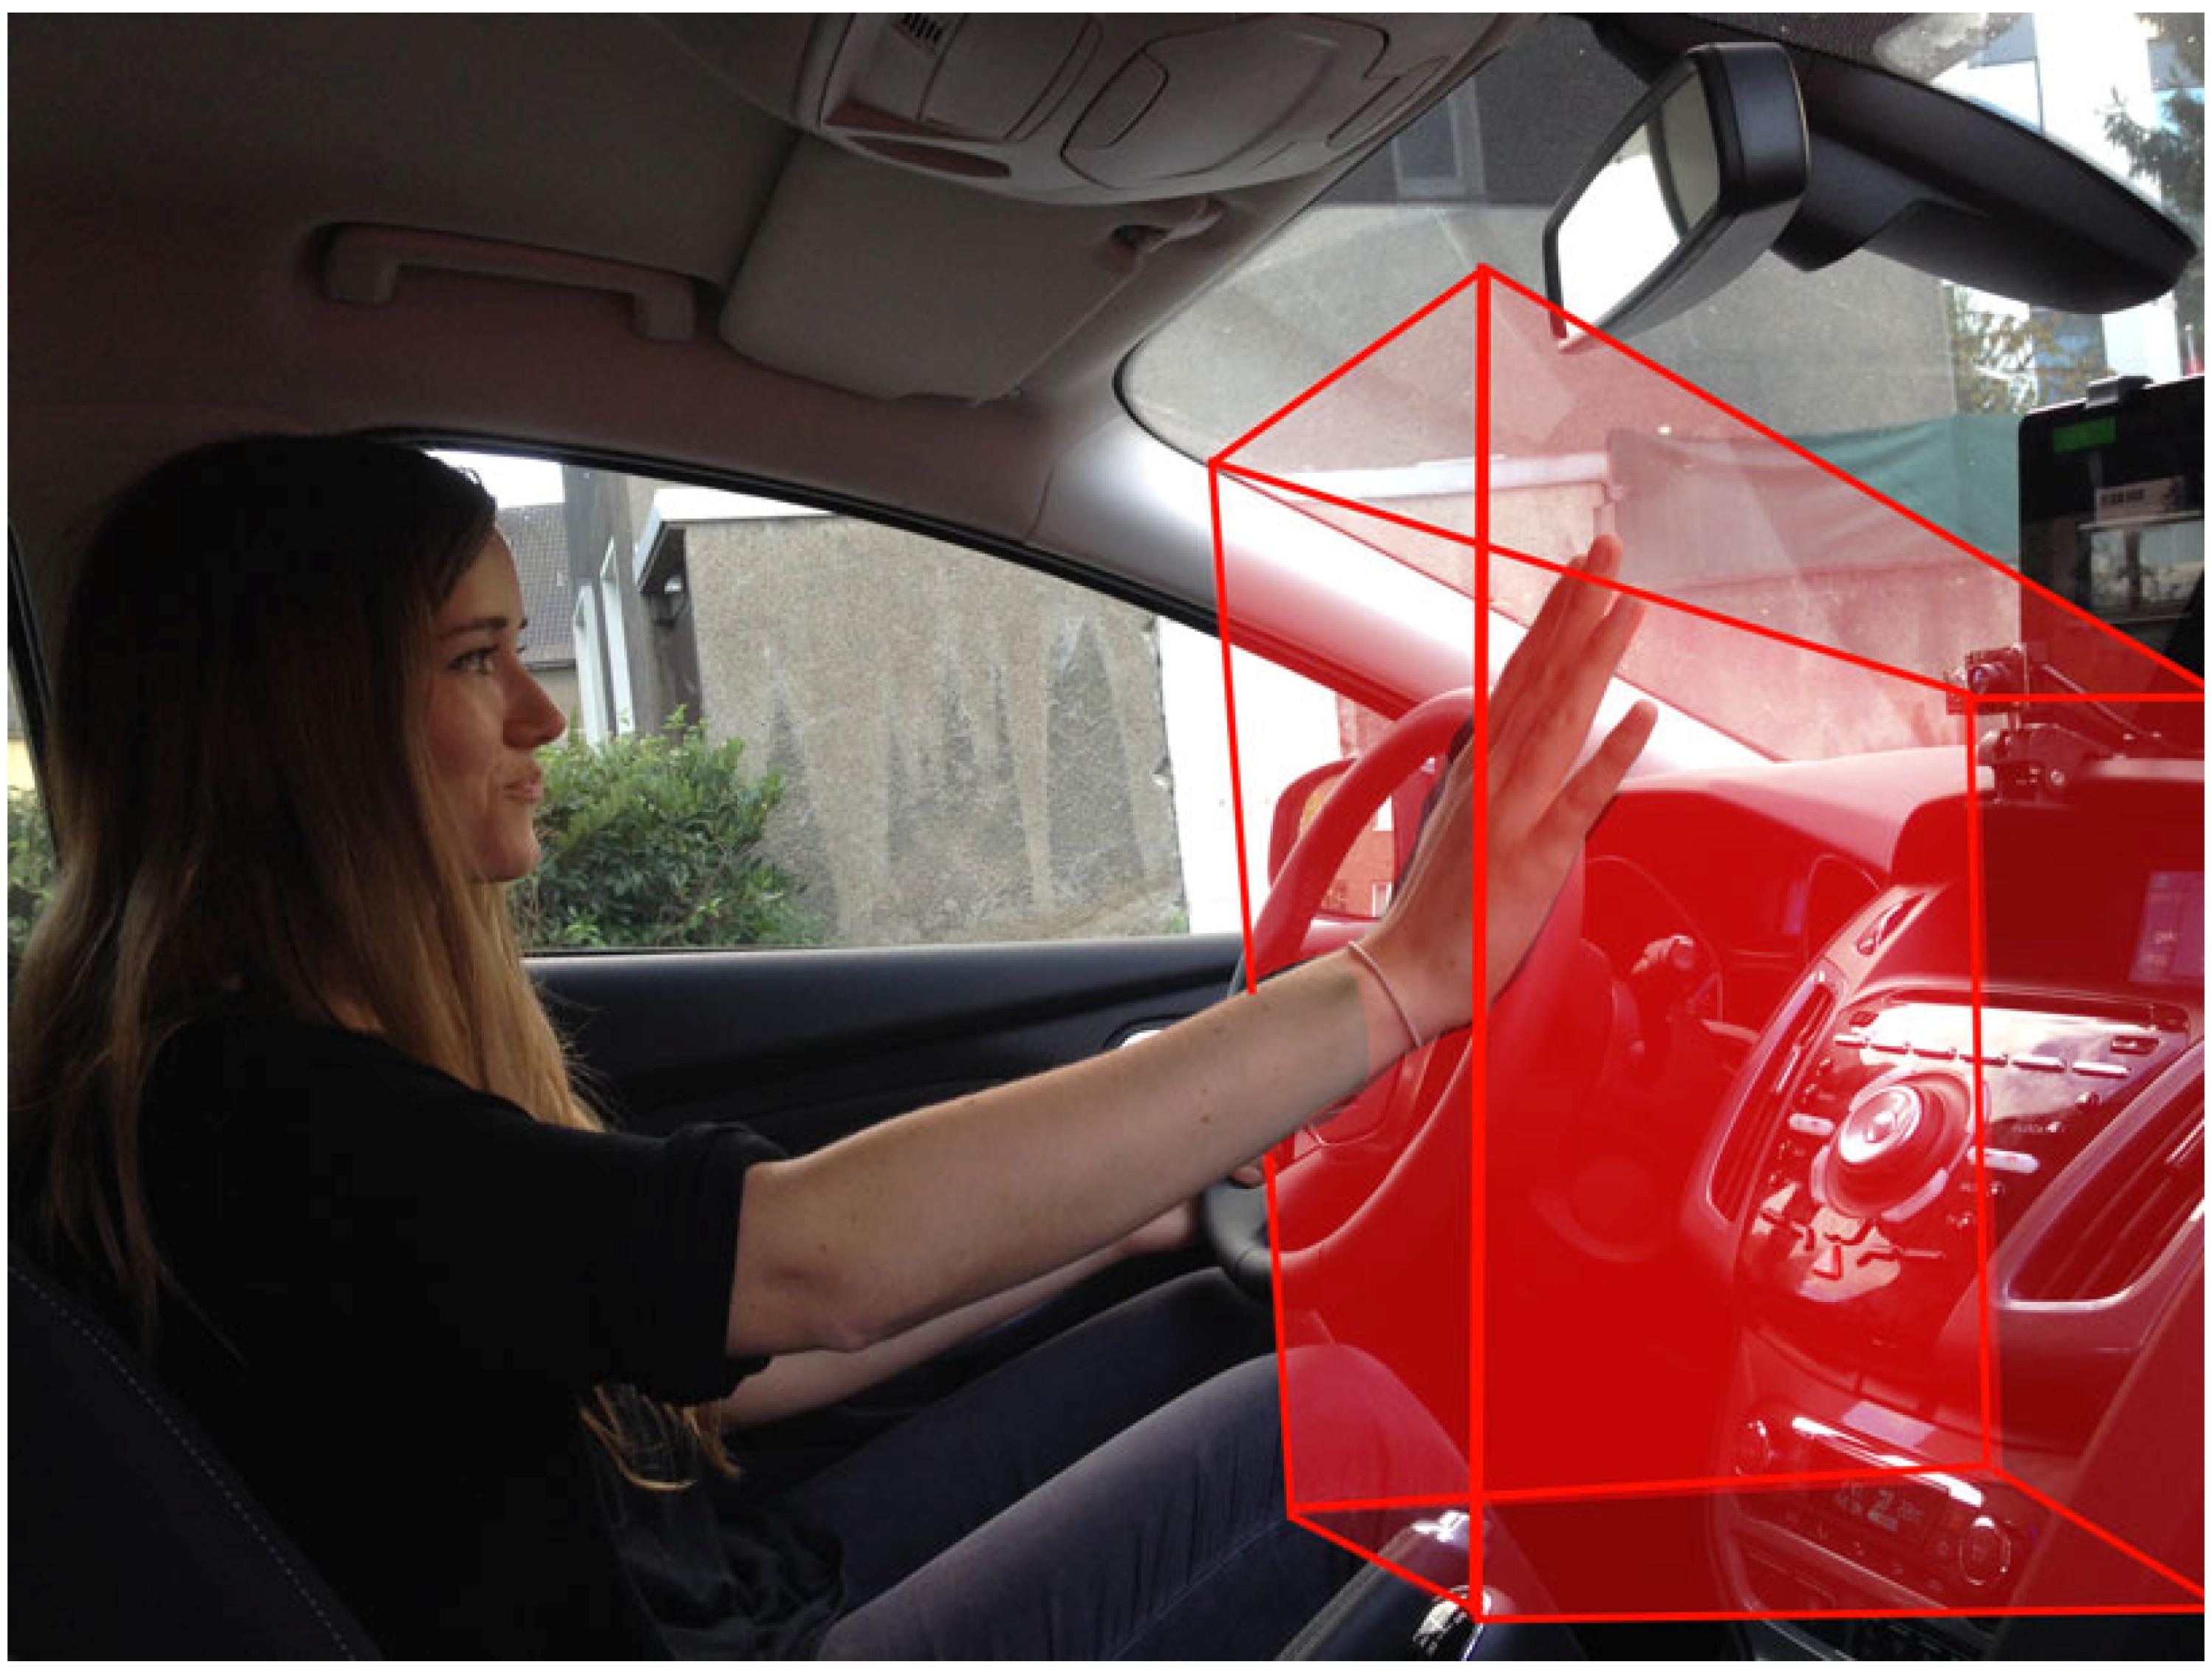 Hand Gesture Control Car: Challenges and potential benefits of hand gesture control cars